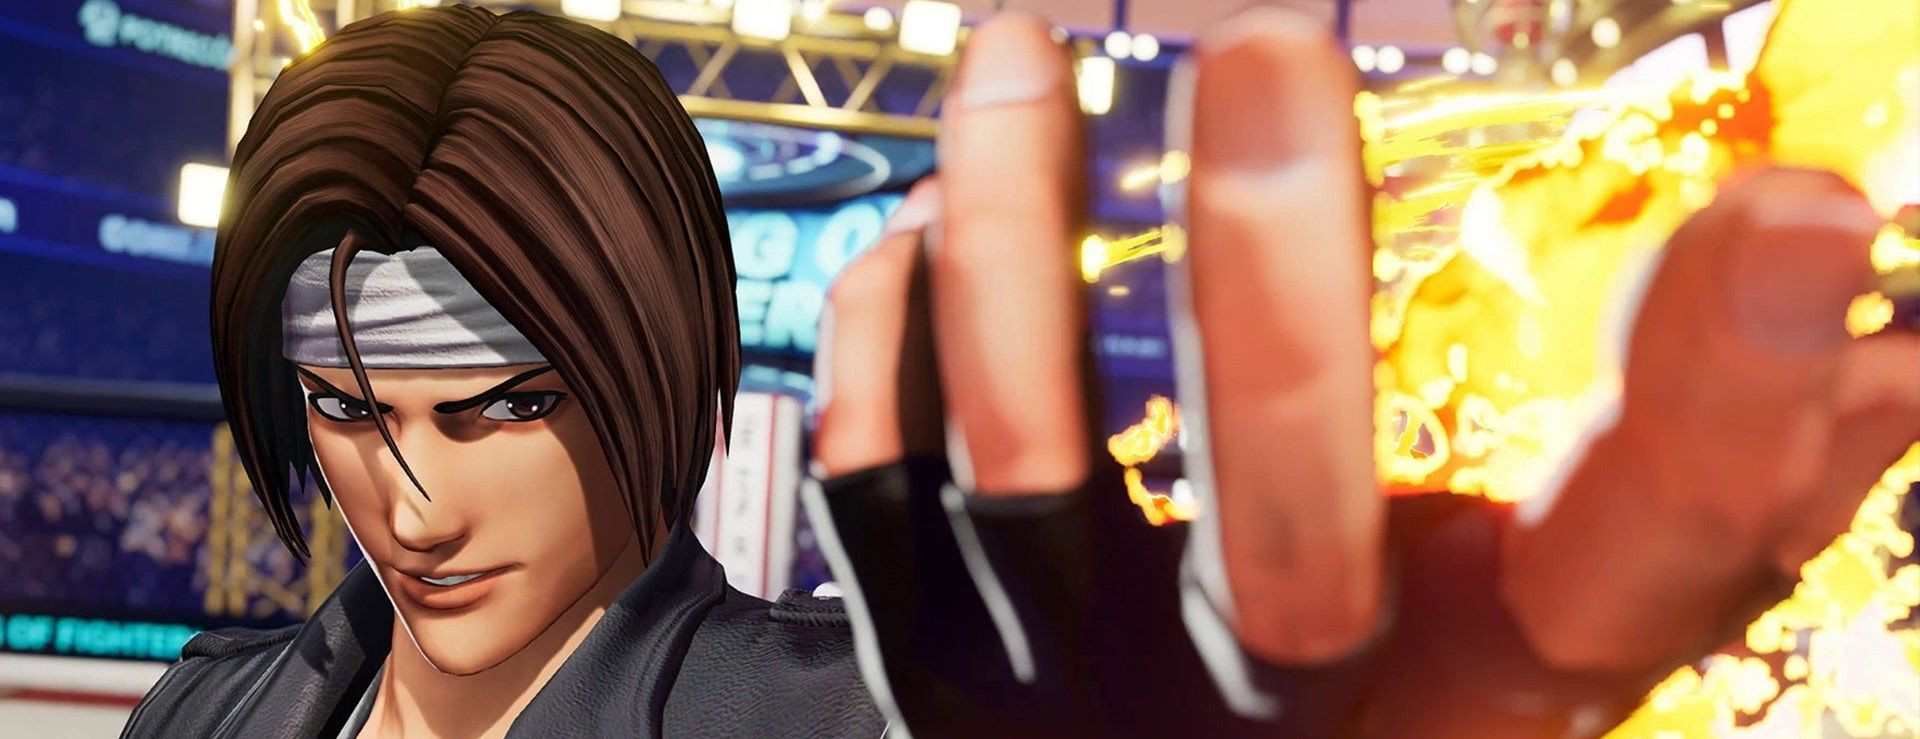 king-of-fighters-xv-first-gameplay-6-characters-revealed_77tw